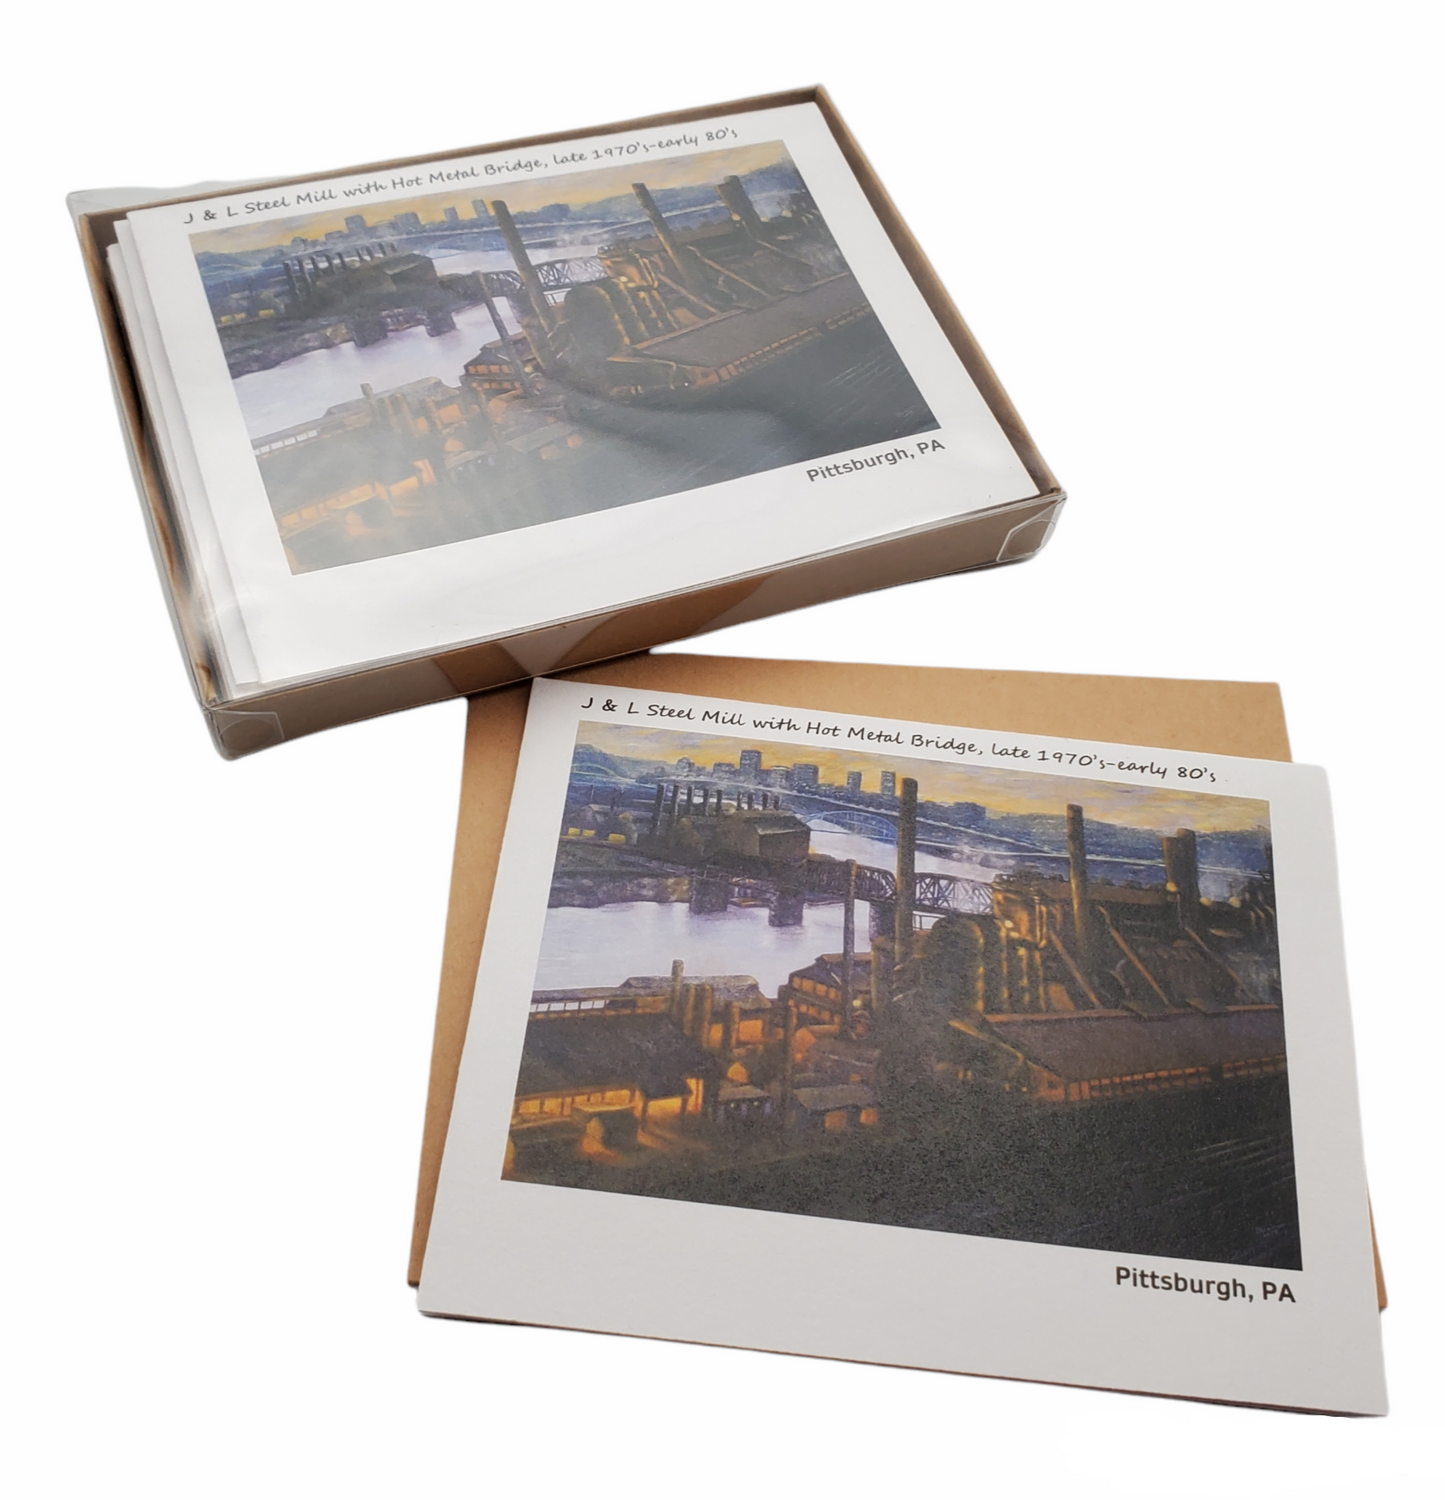 J&L Steel Mill with the Hot Metal Bridge, Pittsburgh -Color Blank Notecards Boxed set of 5